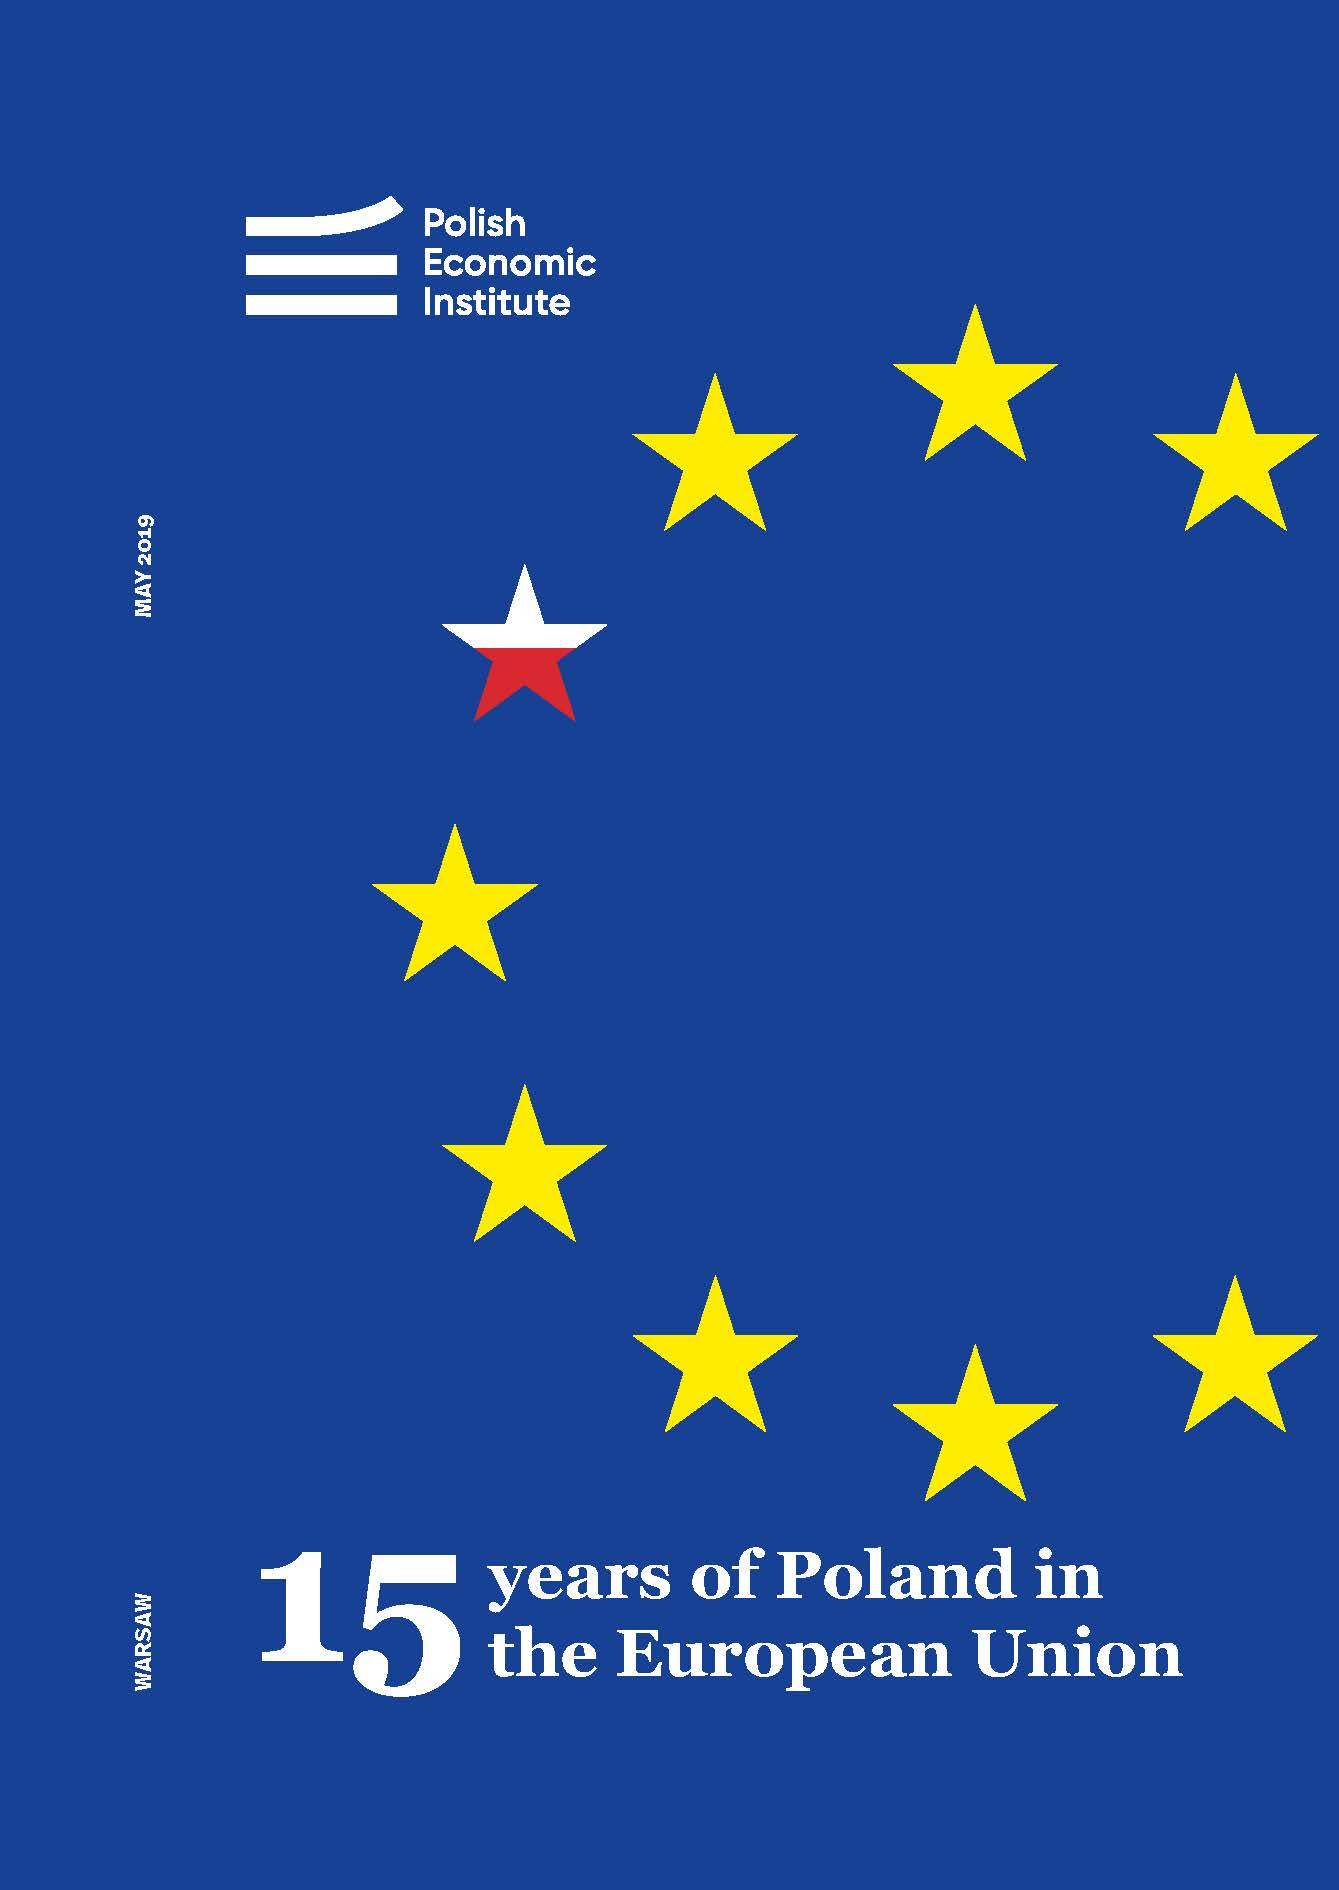 15 years in the EU: Poland received a total of EUR 164 in support